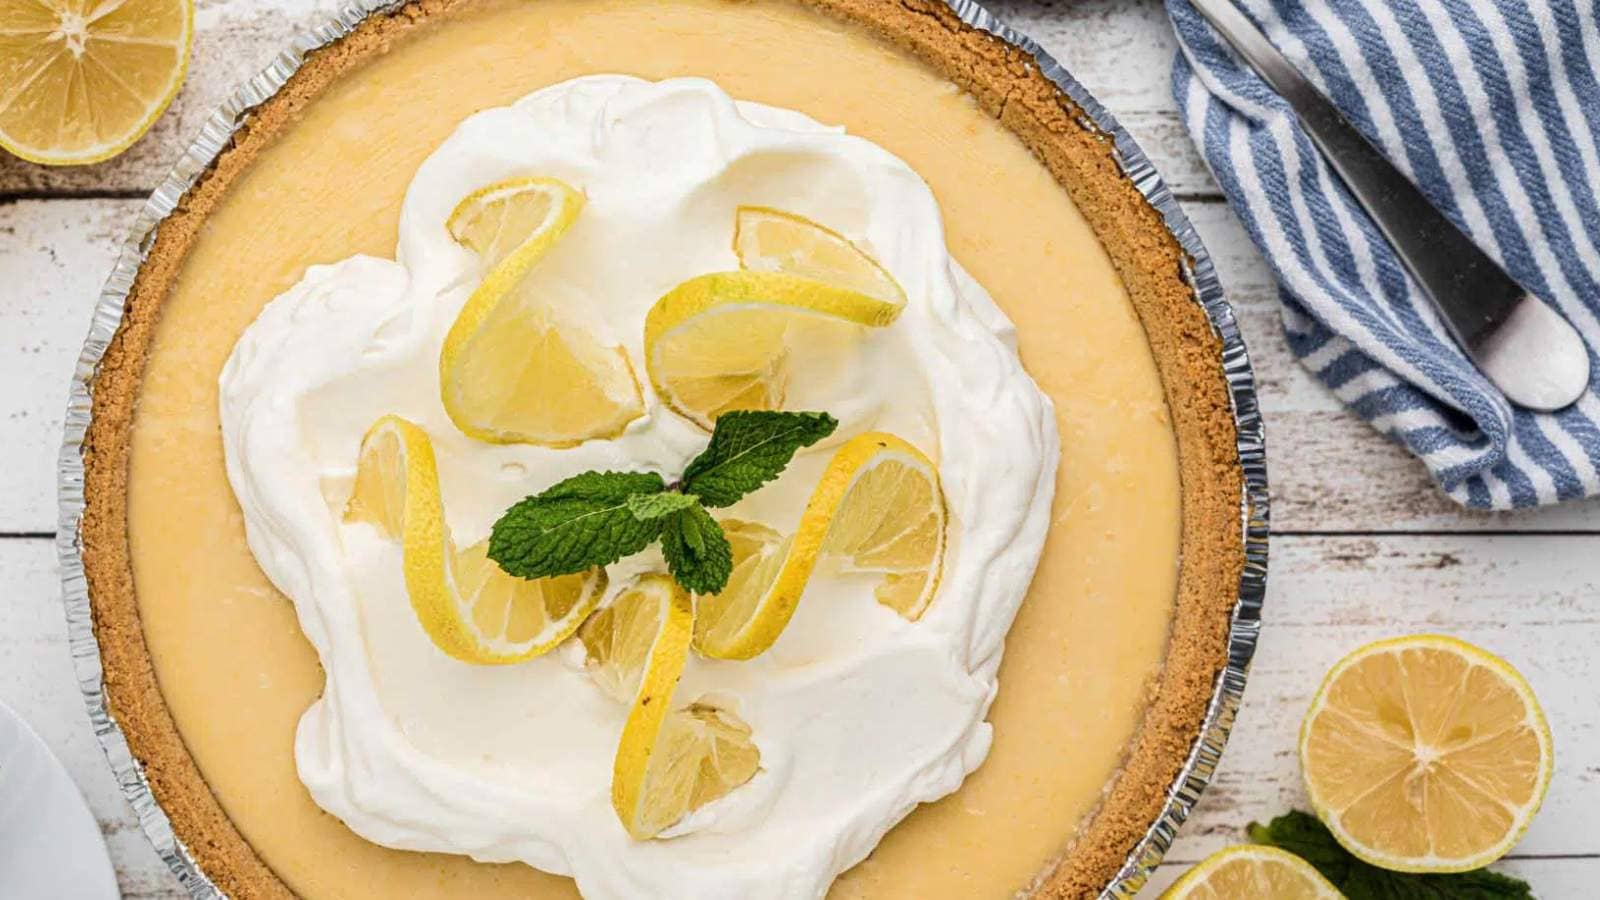 Southern Lemon Pie Recipe by The Cagle Recipe.